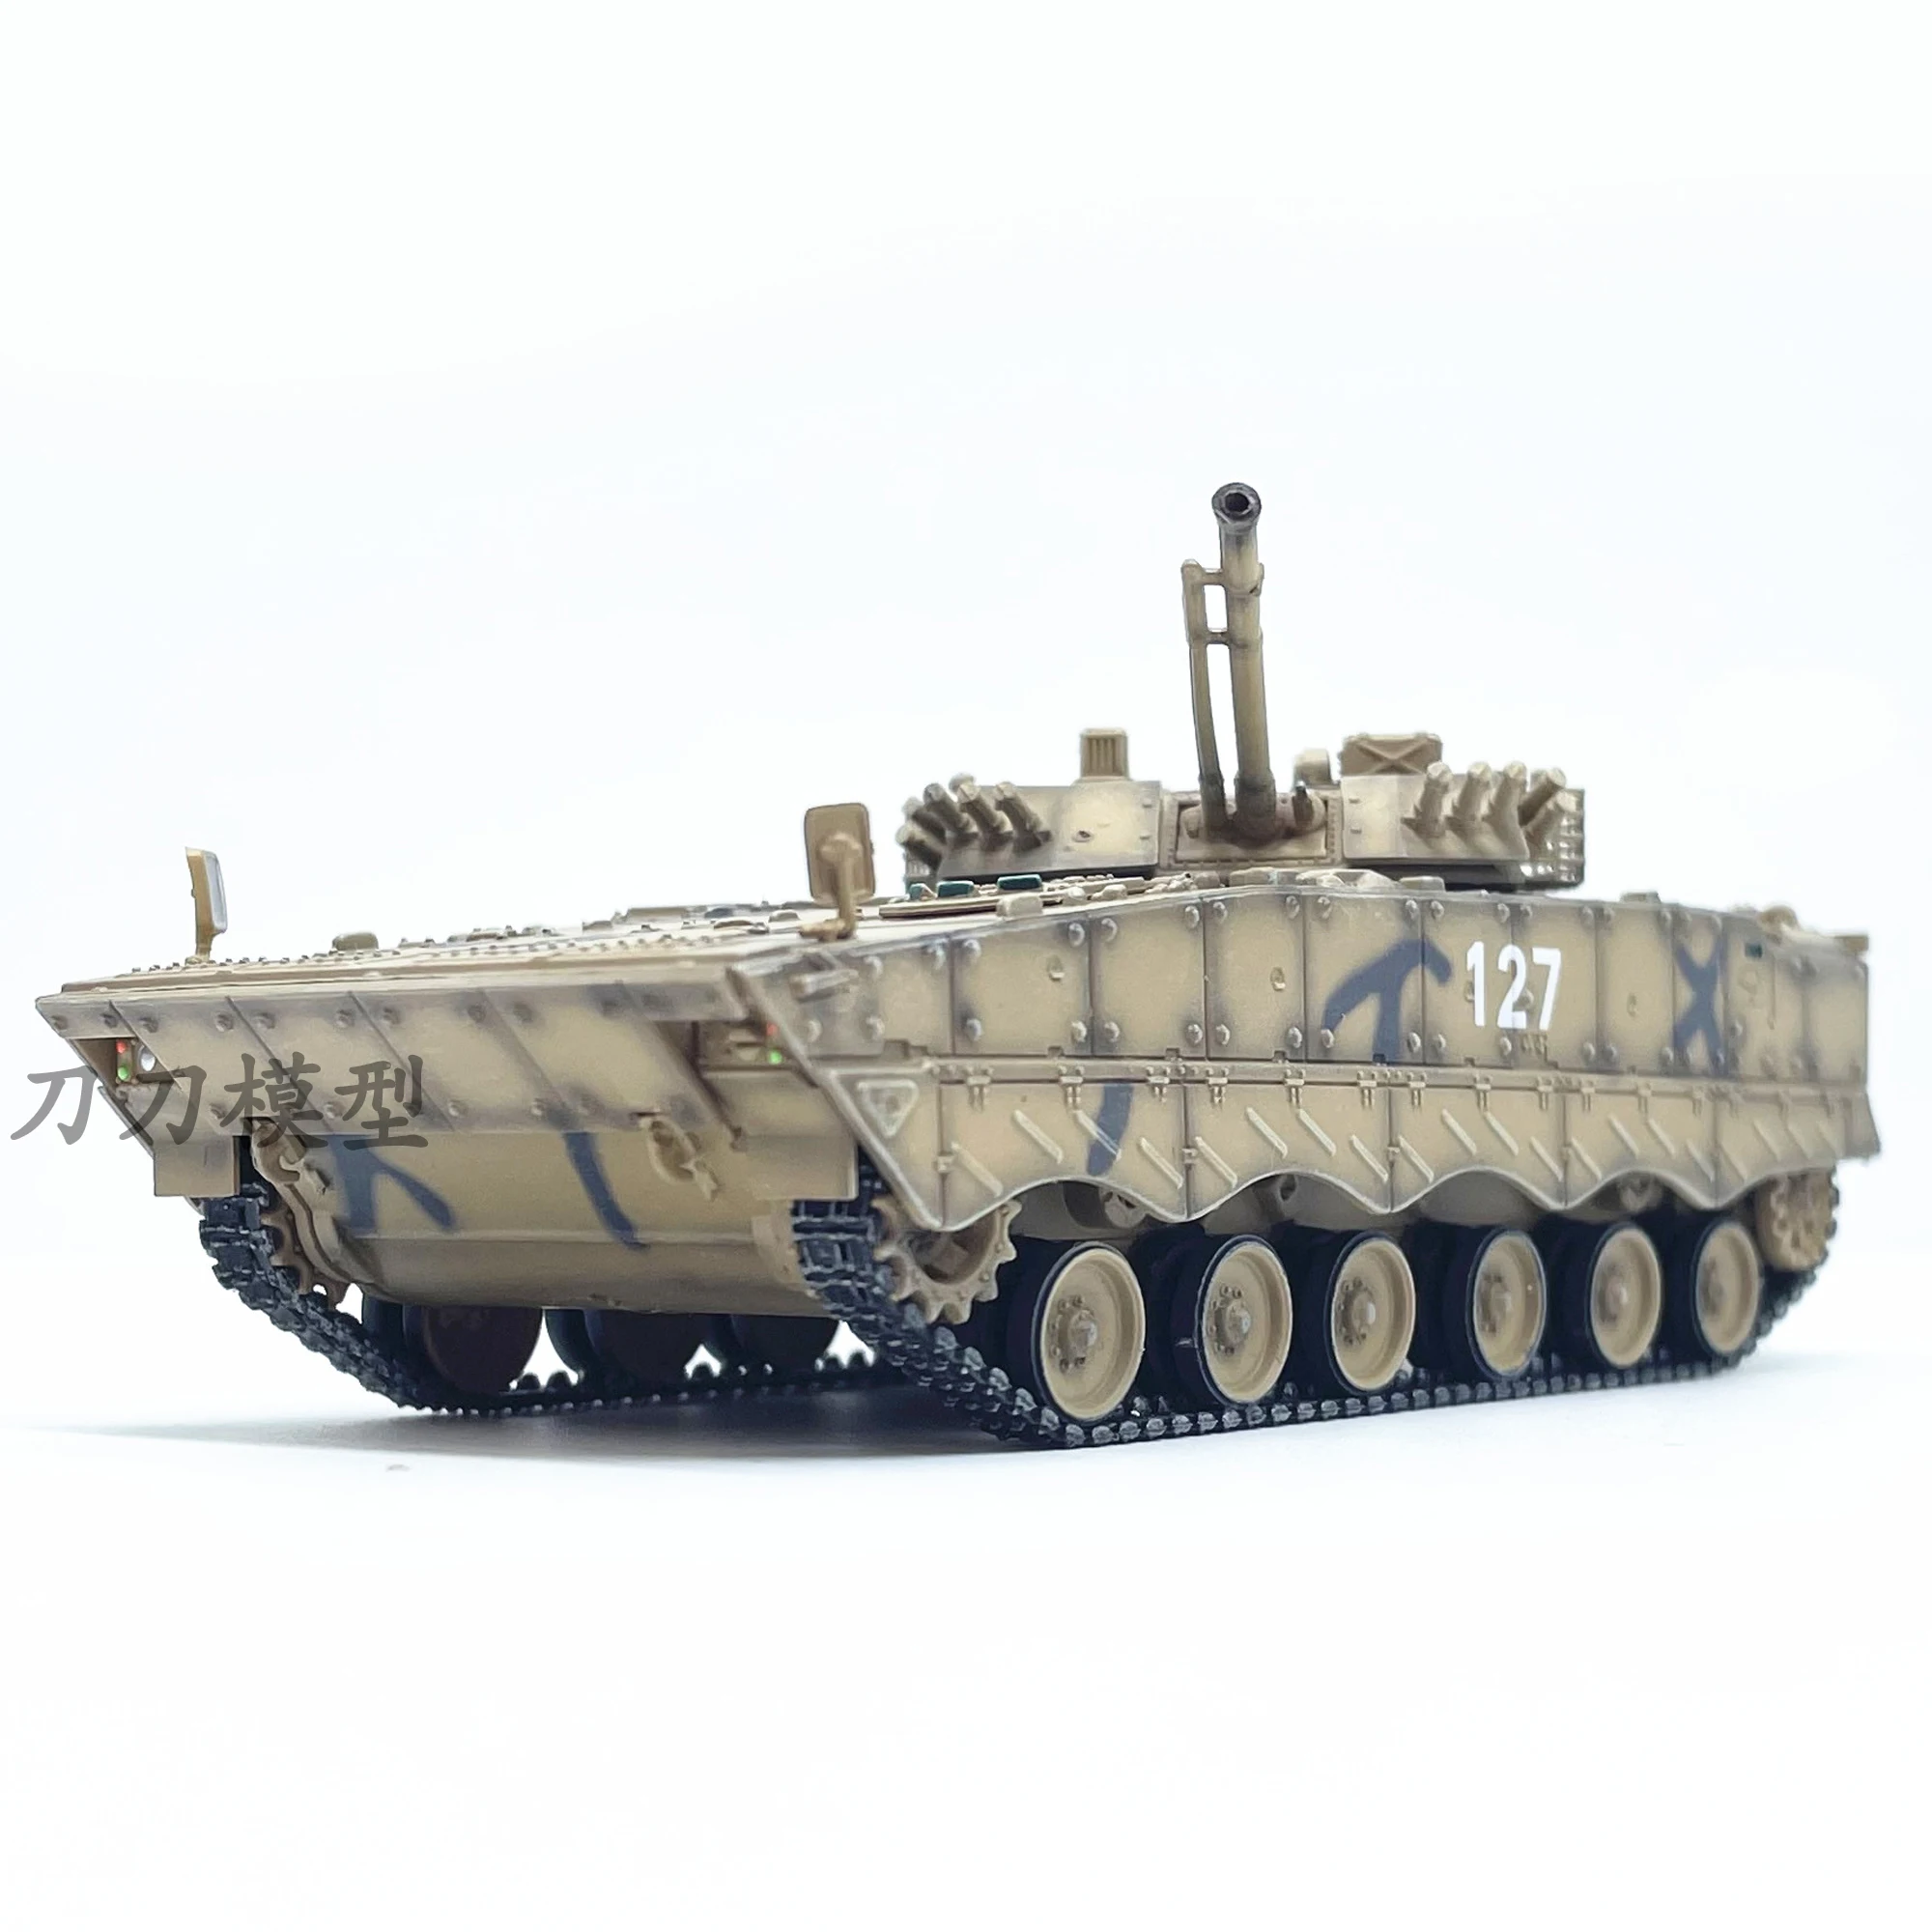 

1:72 Scale Chinese 04A Infantry Fighting Vehicle Simulation Militarized Combat Track Desert Camouflage Tank Model Collection